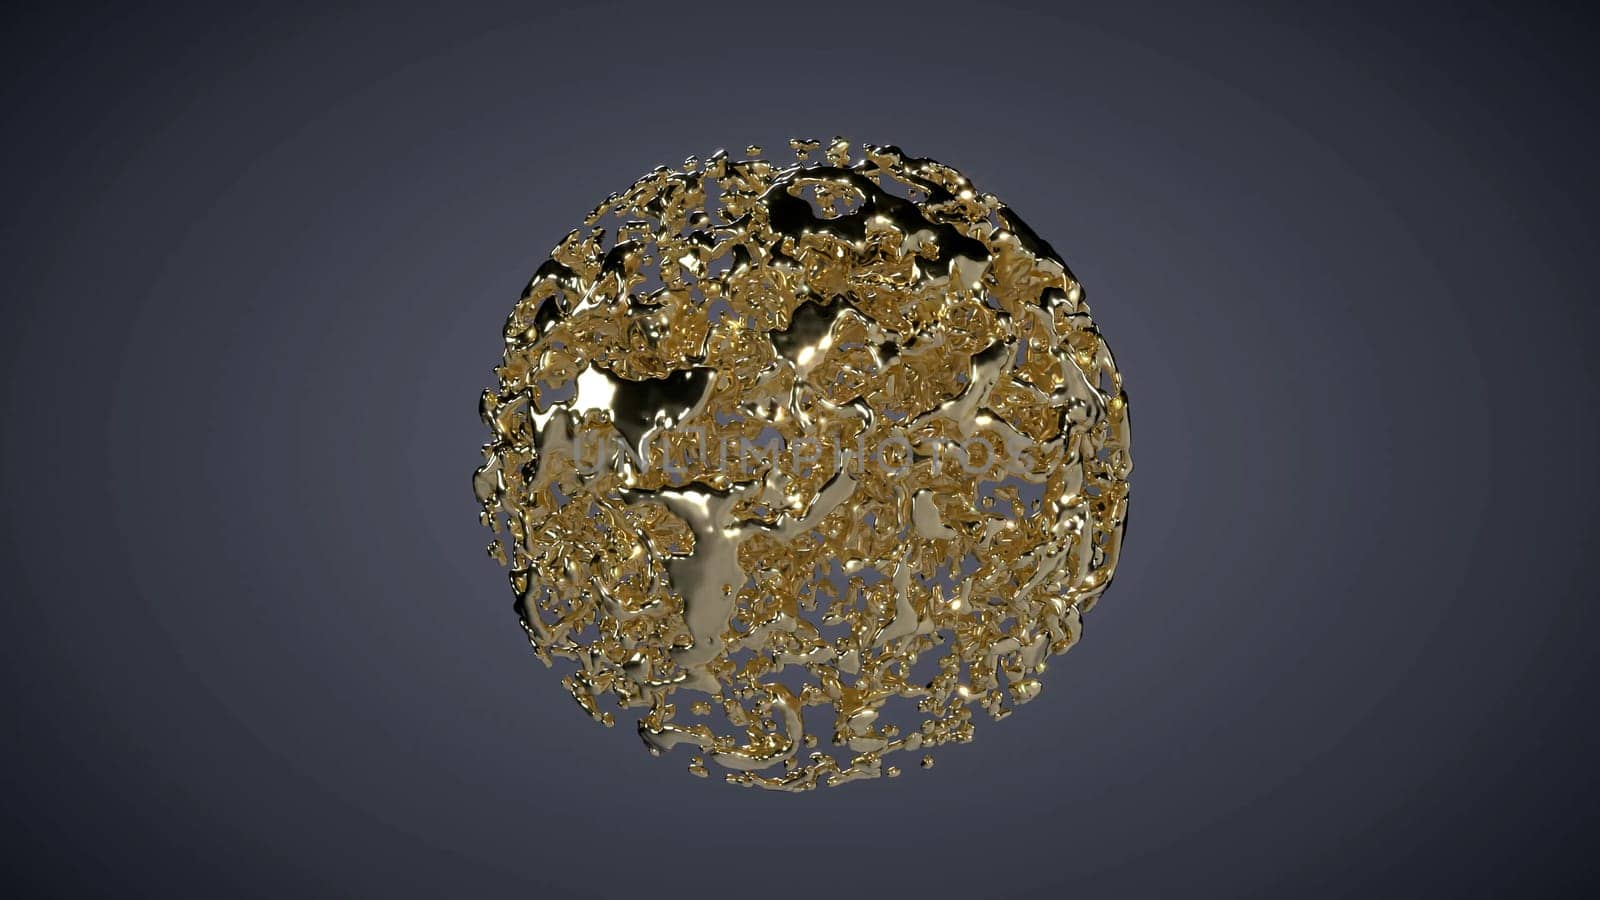 Gold noise sphere abstract luxury intro liquid metal 3d render by Zozulinskyi